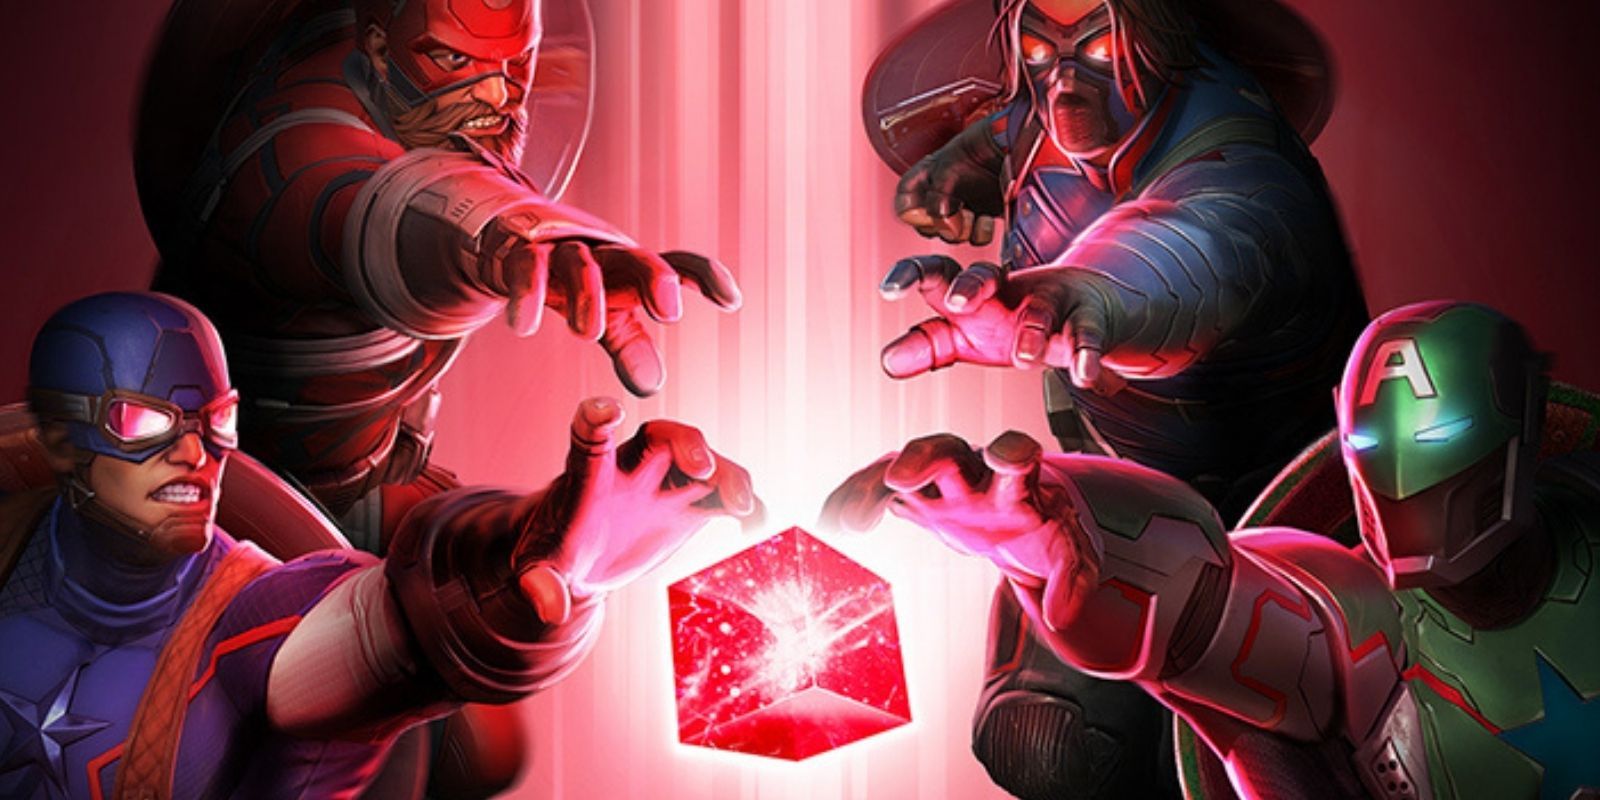 Captain America, Winter Soldier and Red Guardian battle for control of the Red Tesseract in Marvel Realm of Champions